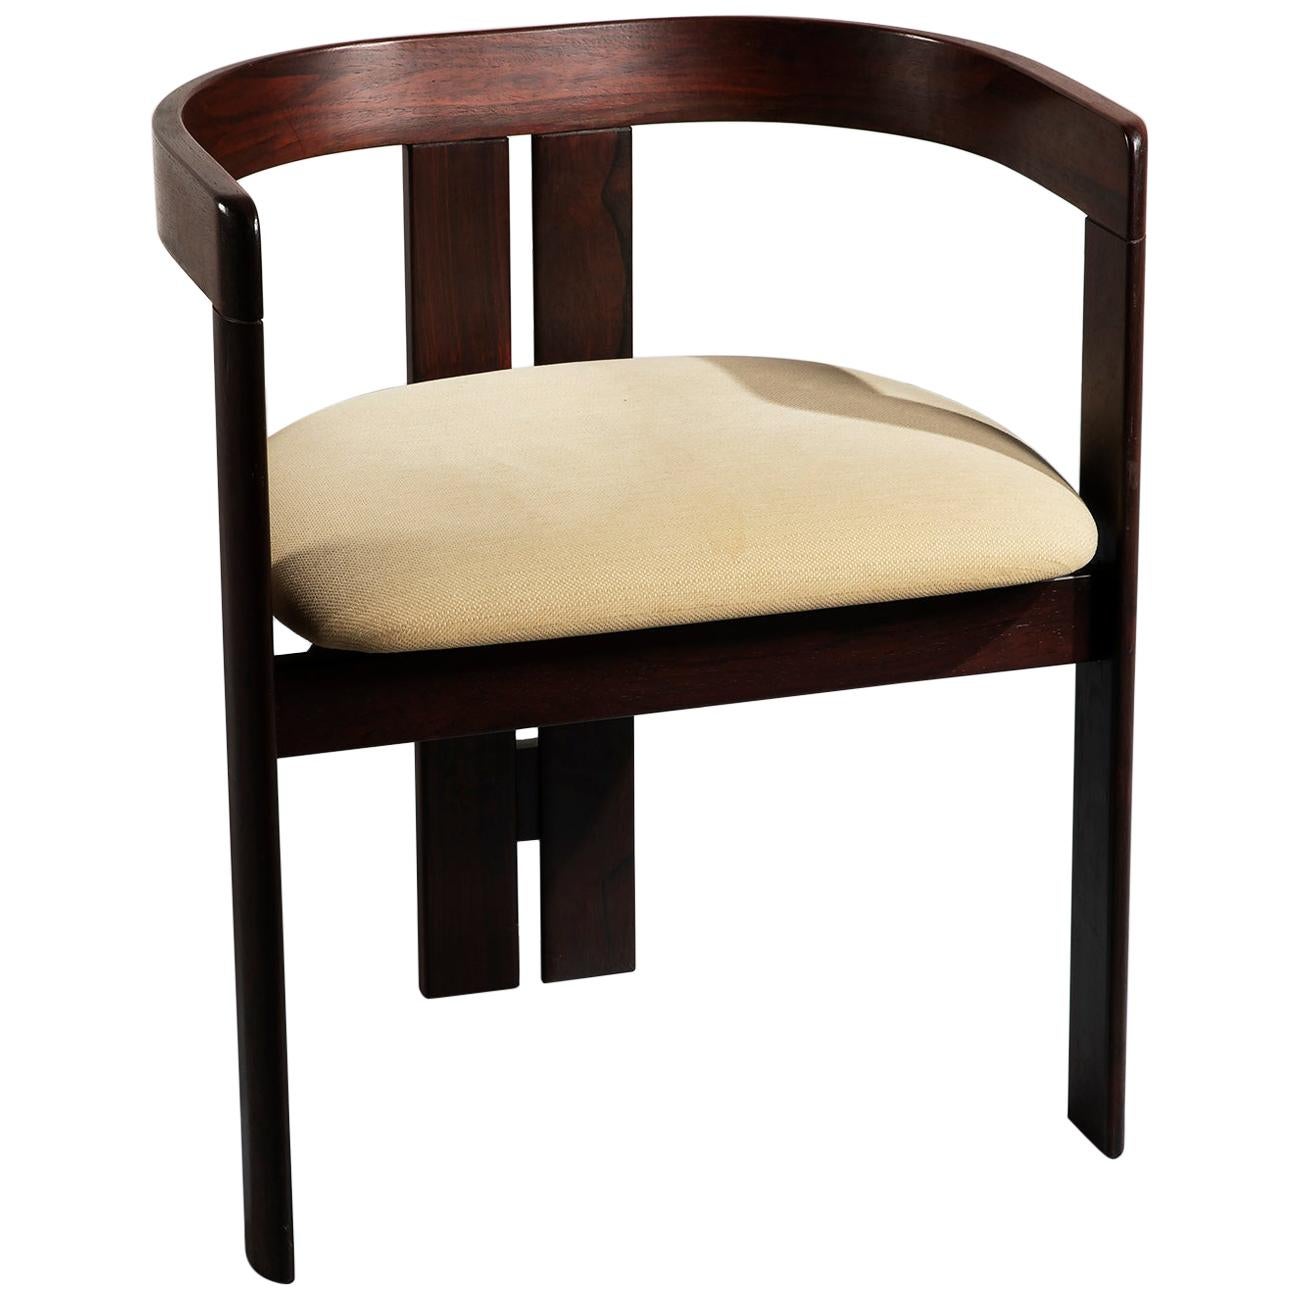 Tobia Scarpa 'Pigreco' Rosewood Armchair for Gavina, 1960s For Sale